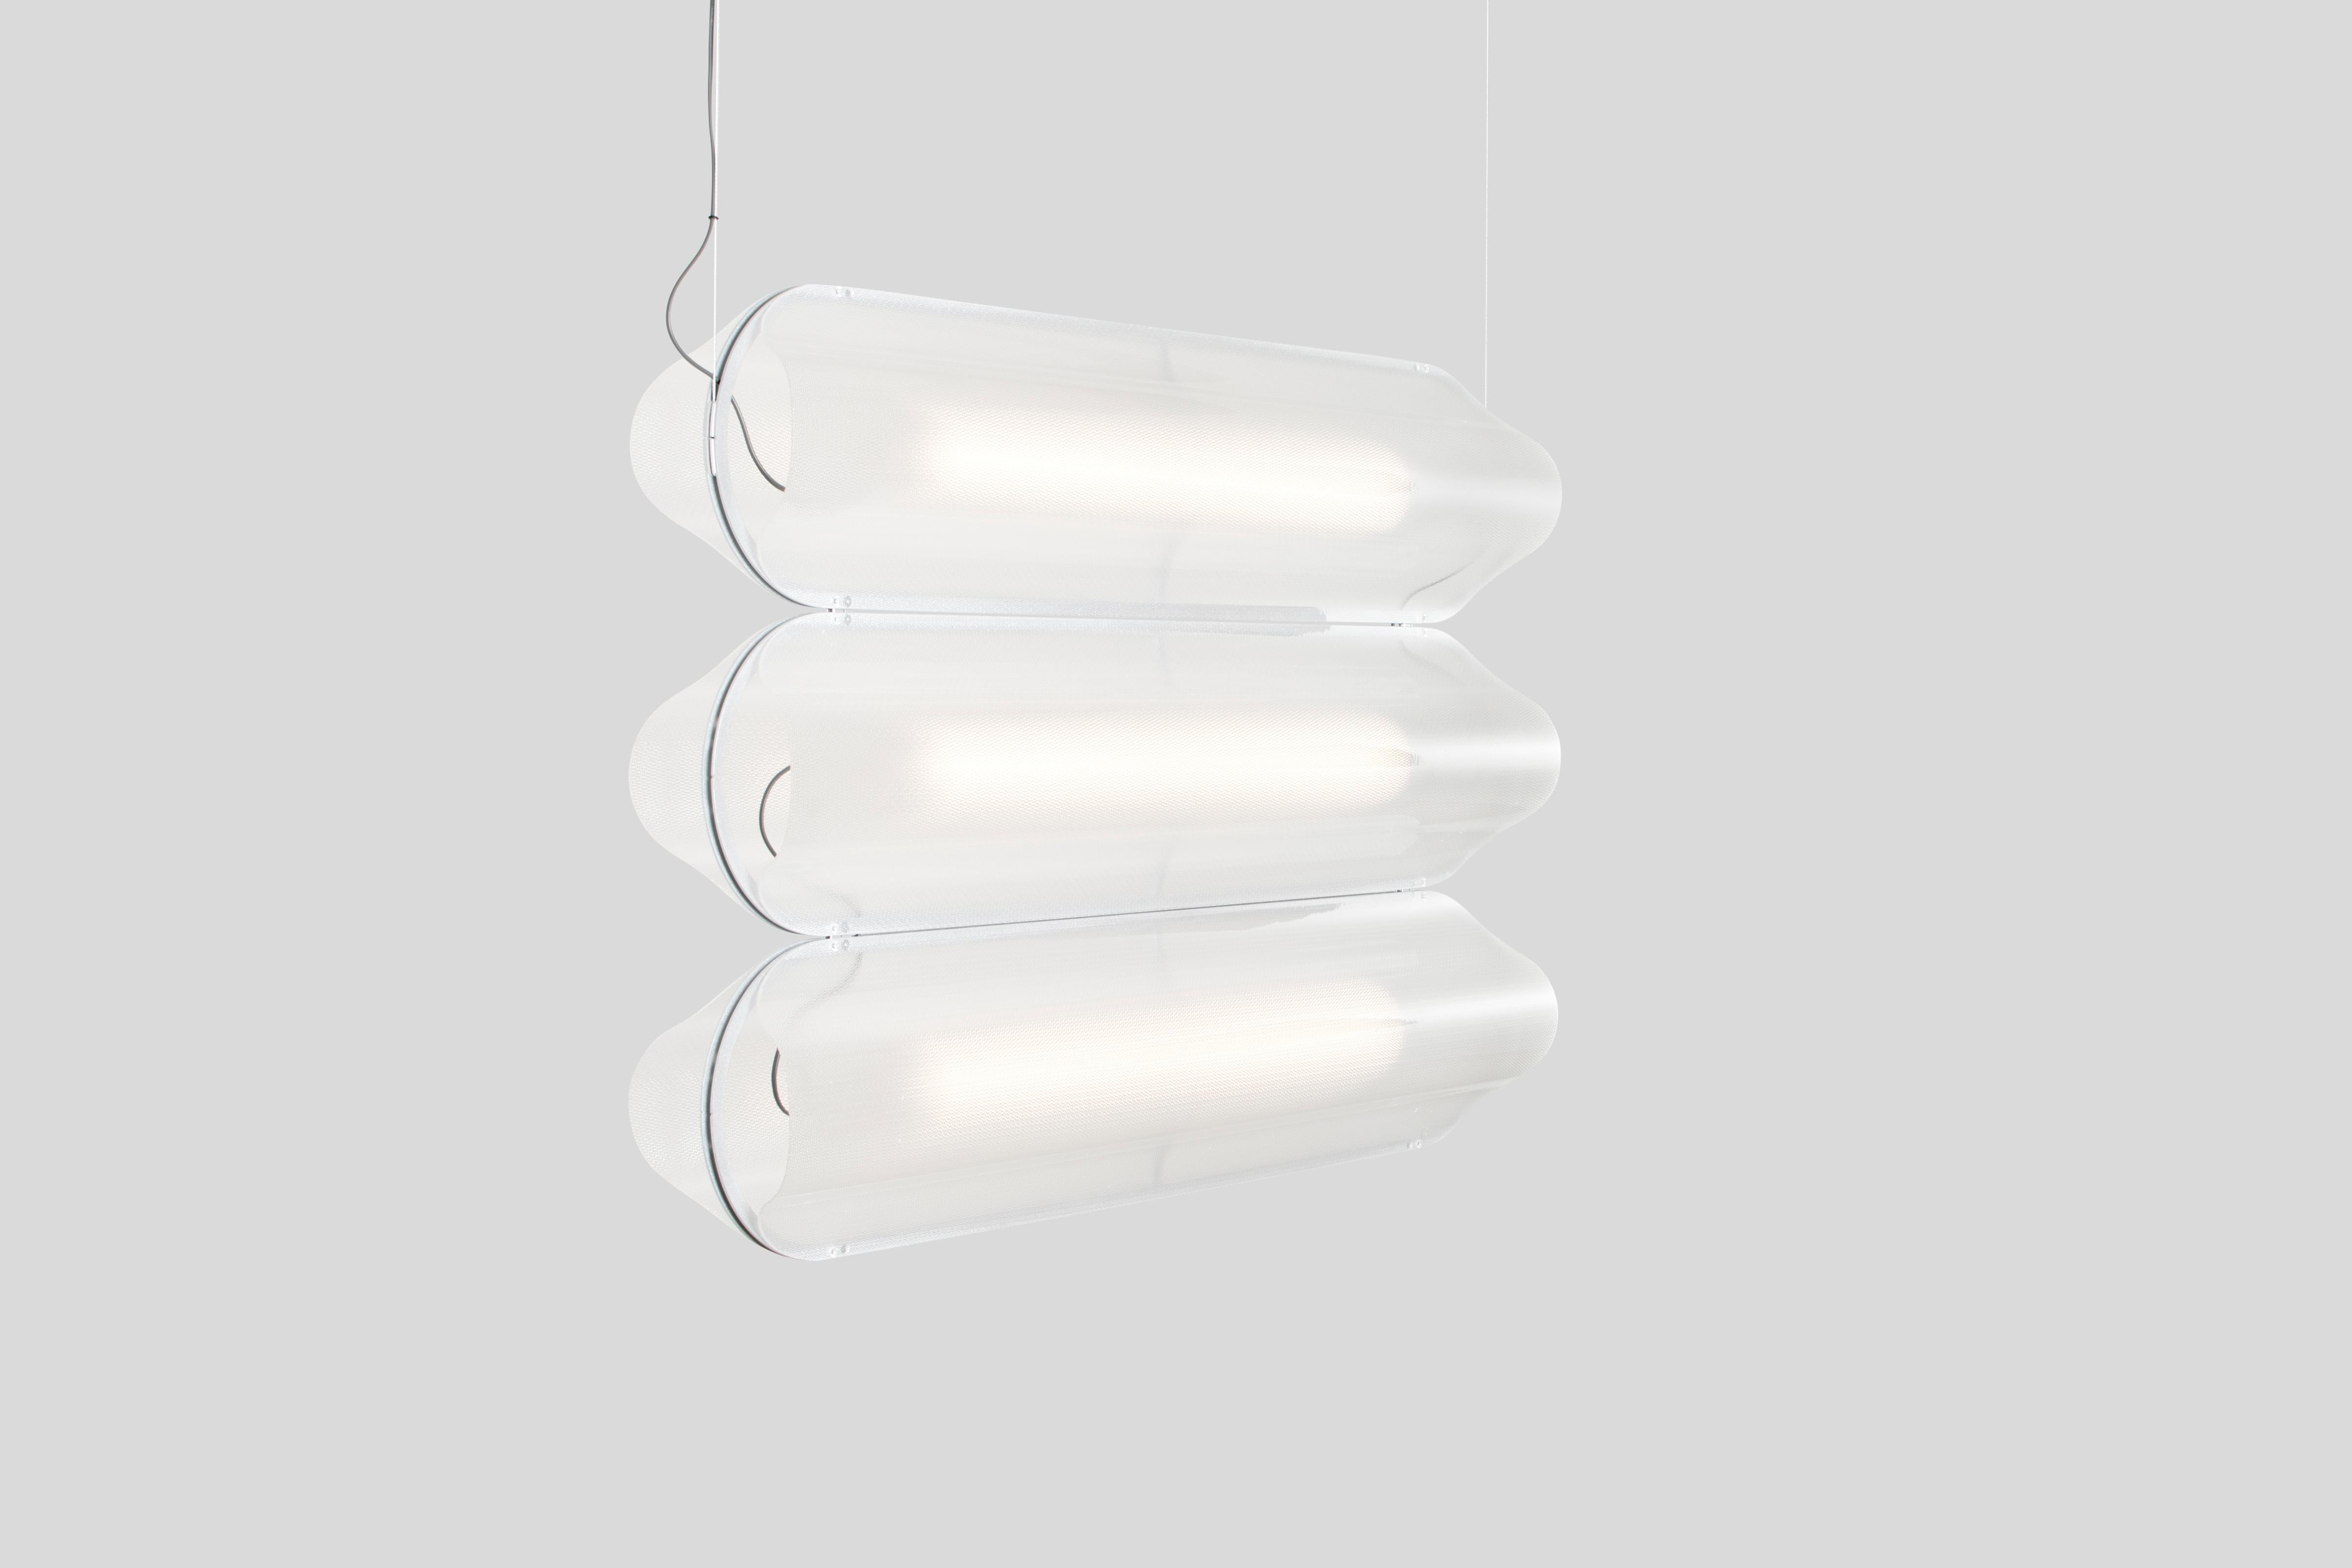 VALE, pendant lamp
Design: Caine Heintzman, Editor: ANDLight

The Vale series optimises functionality through its multidirectional luminescence while diffusing soft ambient light.

Materials
– Acrylic
– Aluminum

Dimensions
102 x 30 x 23